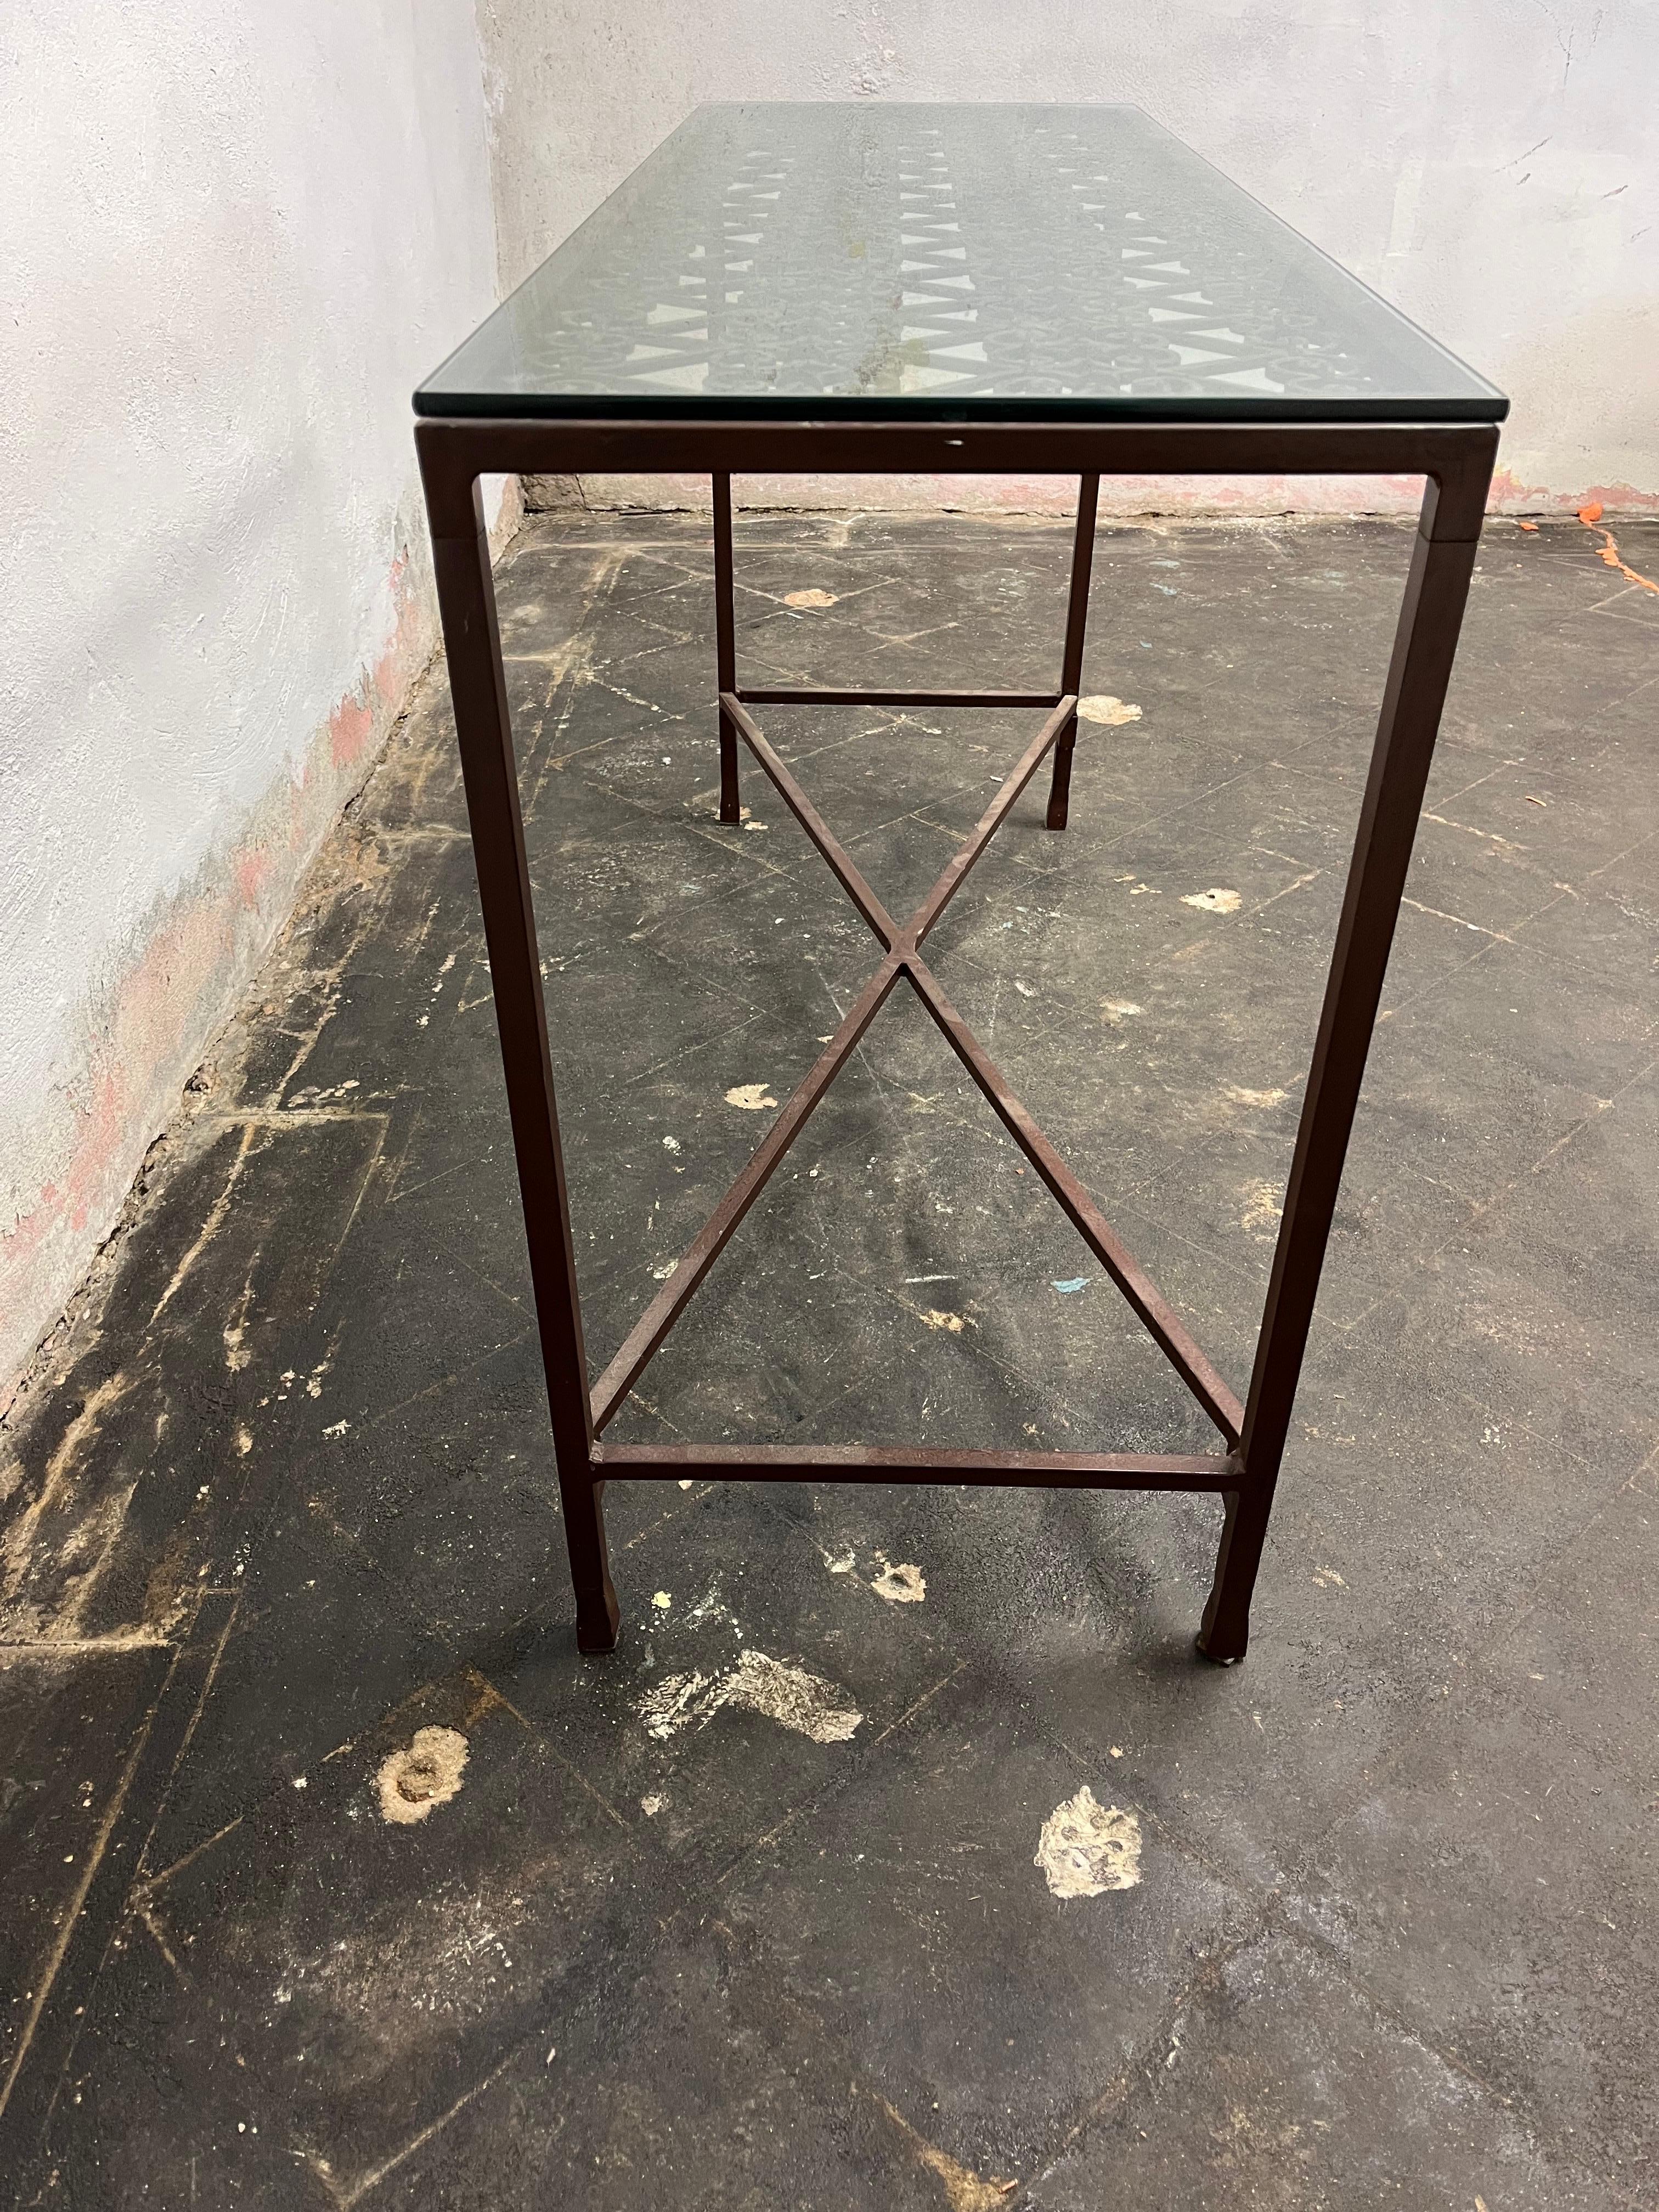 Sophisticated glass top console with iron scrolled gate top. Slender tapered legs with x base stretcher that sits in leg holes to allow for leveling. Nice aesthetic.
Curbside to NYC/Philly $300